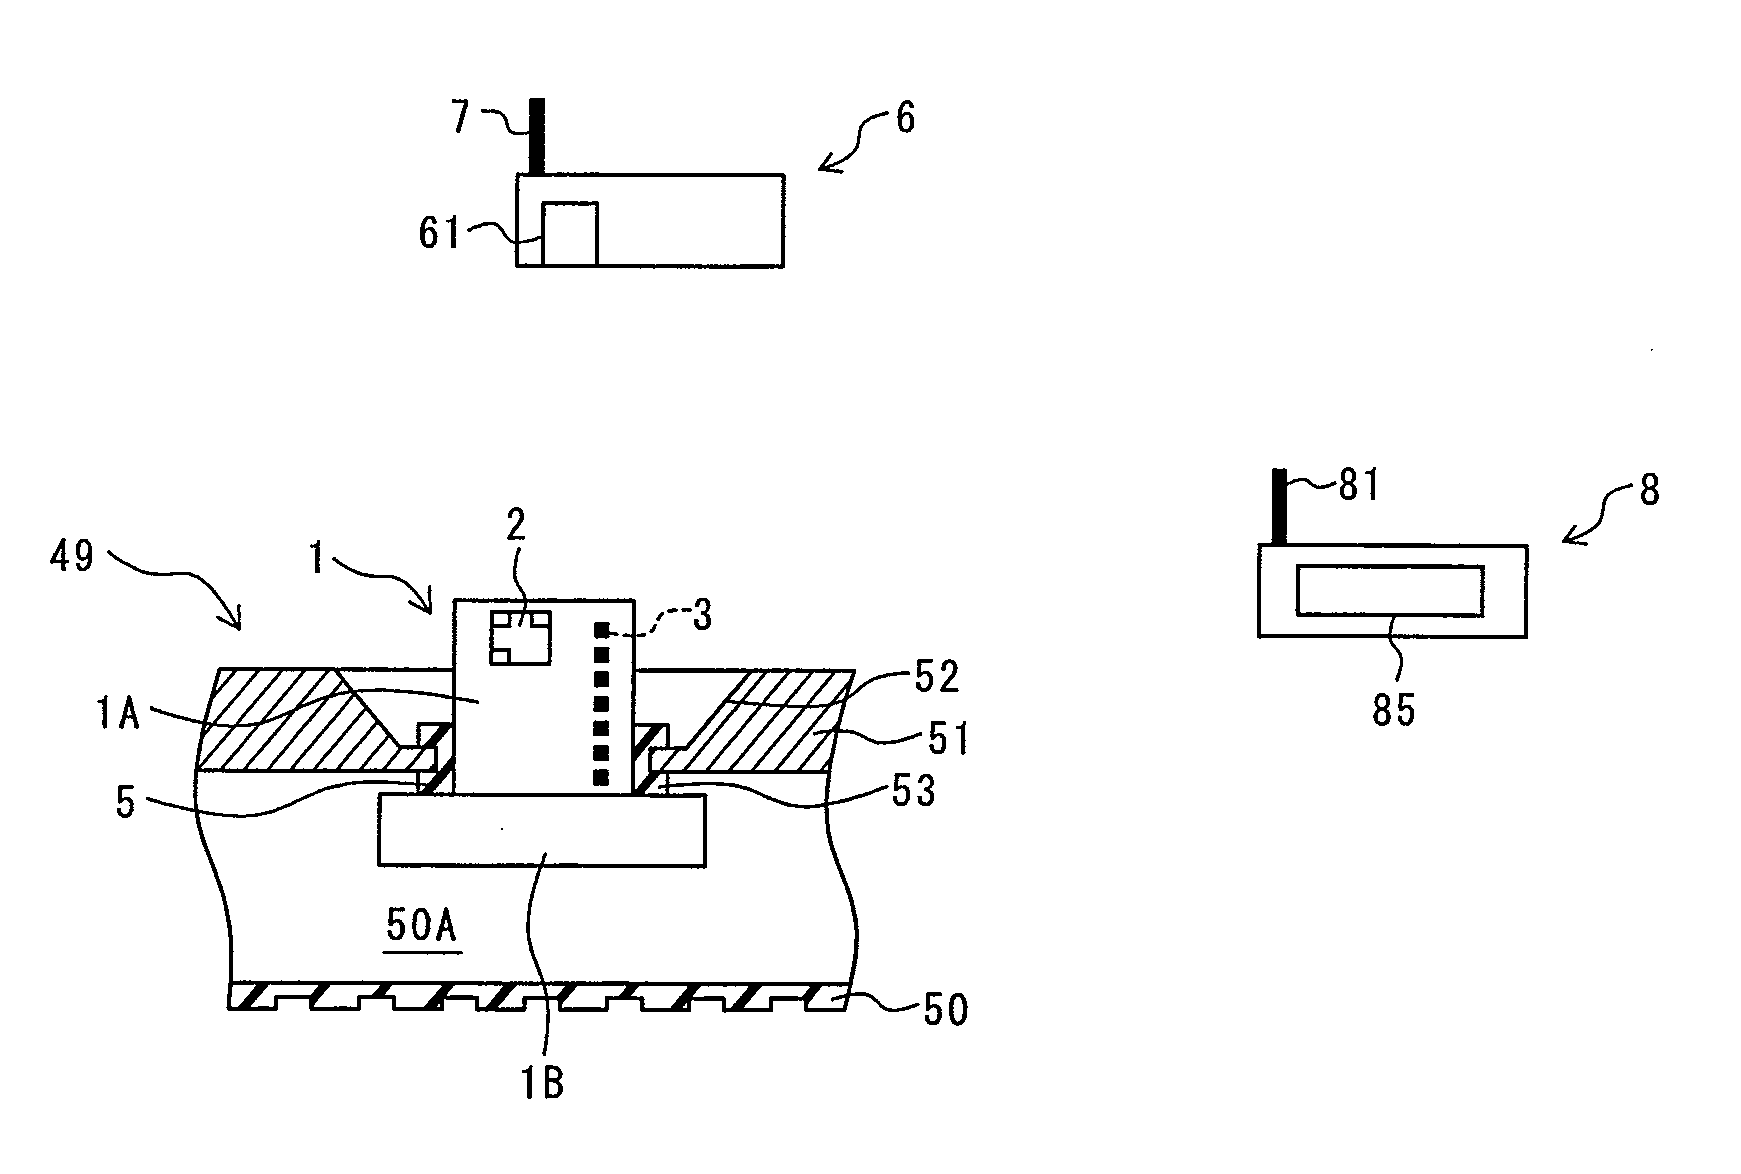 Pressure measuring module for detecting air pressure within a tire included in a wheel assembly attached to a vehicle body and tire pressure monitoring system